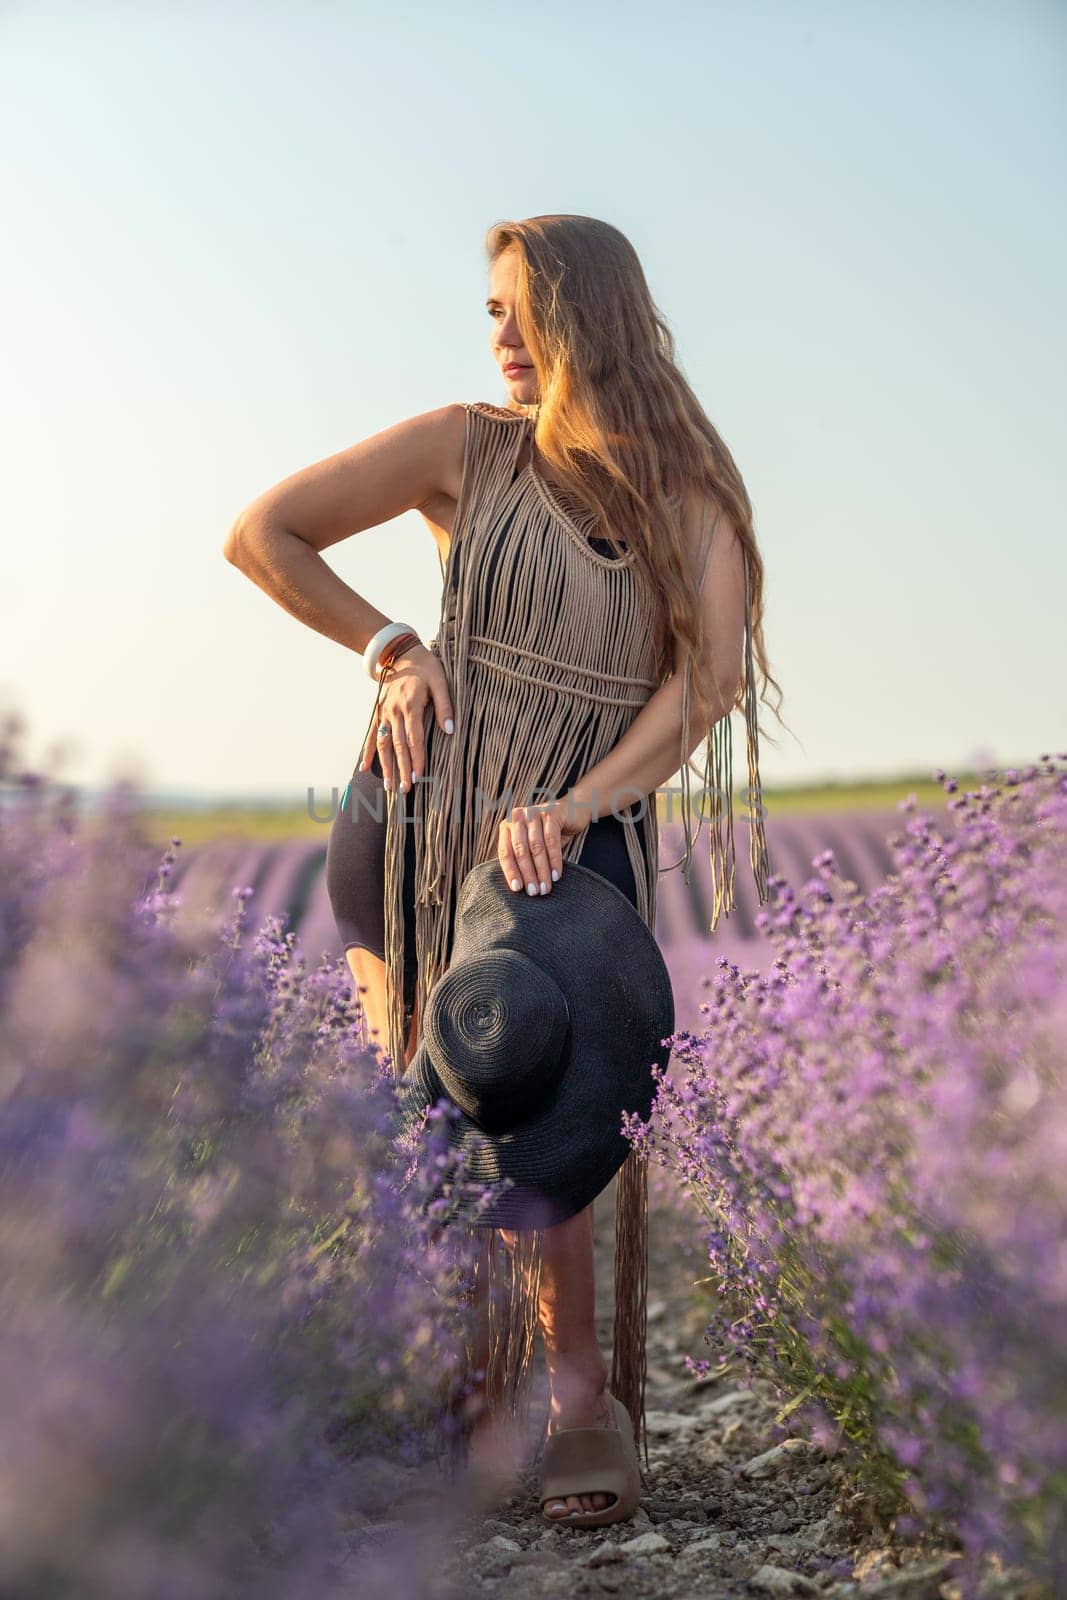 A woman is standing in a field of purple flowers, wearing a black dress and a black hat. by Matiunina